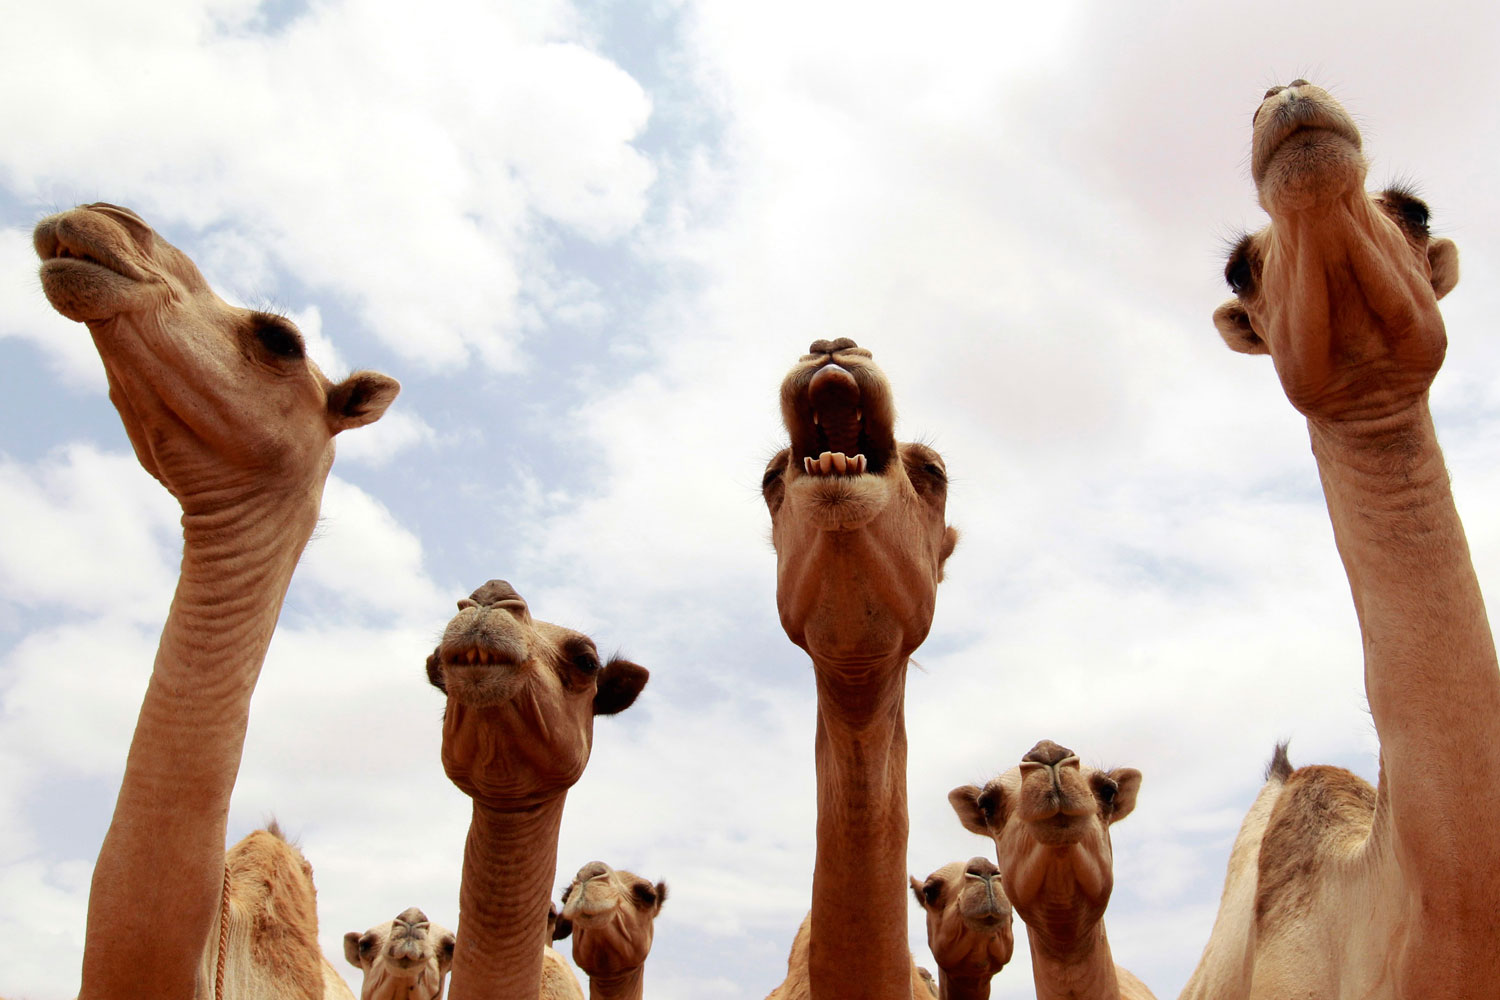 Camels wait for their turn to drink water from a tank near Harfo, 70 km from Galkayo northwest of Somalia's capital Mogadishu, July 20, 2011. The United Nations on Wednesday declared famine in two regions of southern Somalia, and warned that this could spread further within two months in the war-ravaged Horn of Africa country unless donors step in.